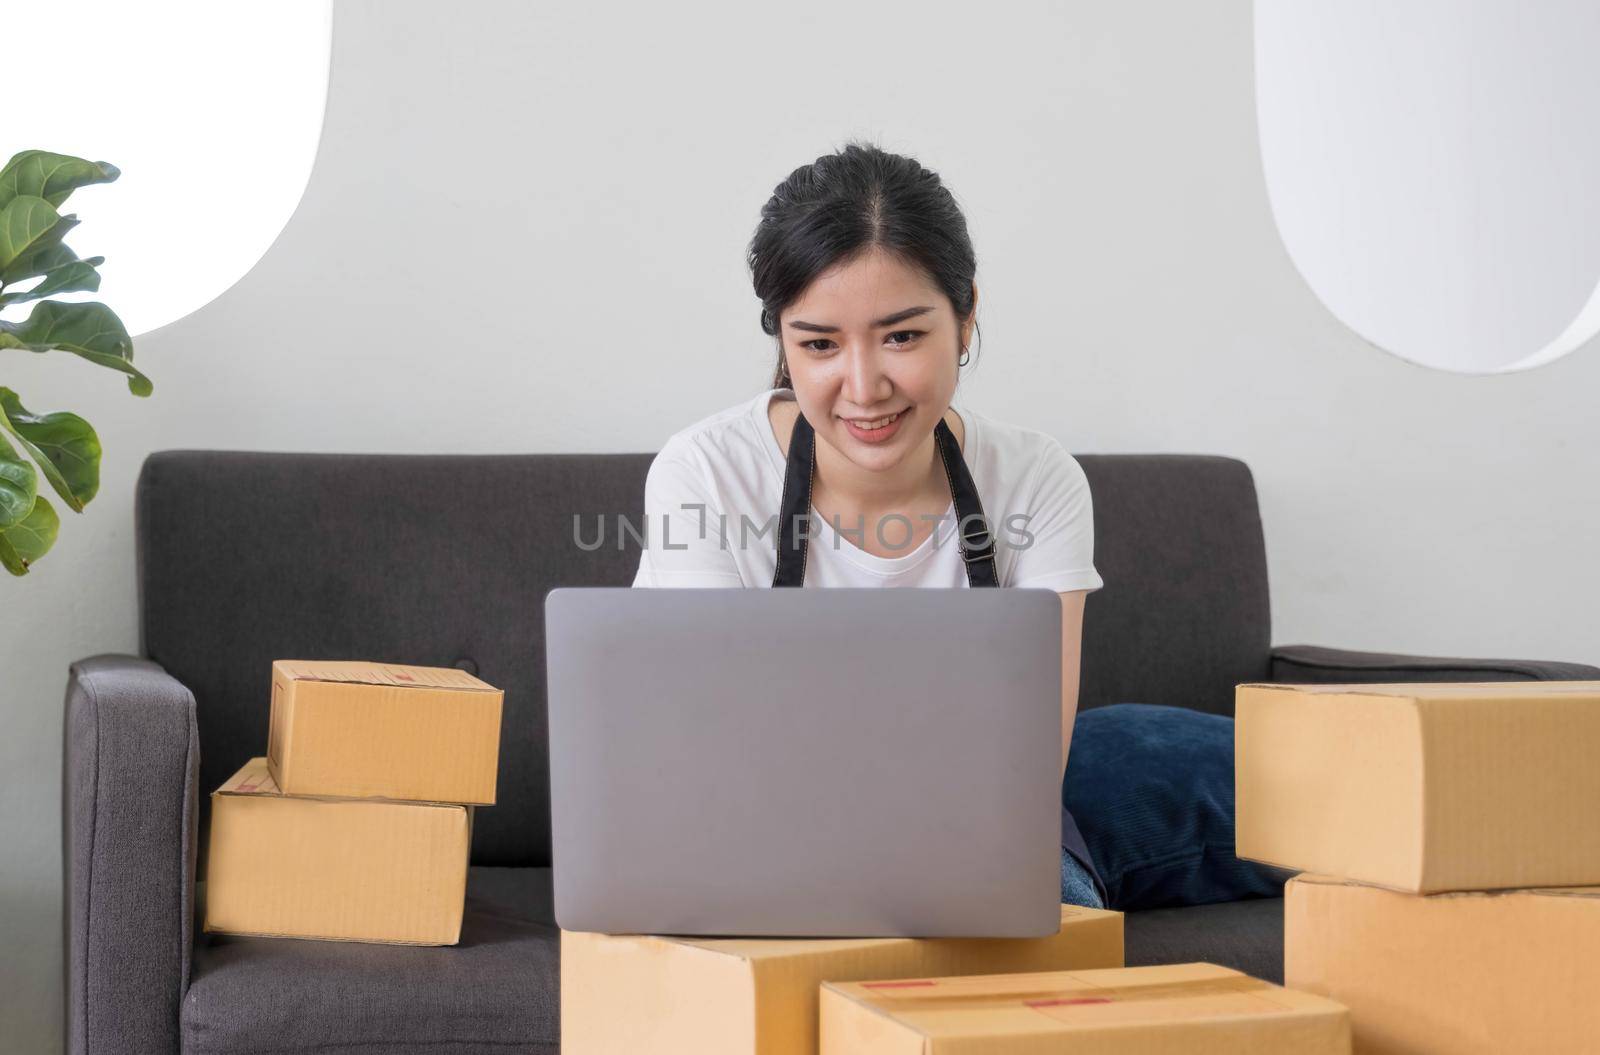 Starting Small business entrepreneur freelance,Portrait young woman working at home office, BOX,smartphone,laptop, online, marketing, packaging, delivery, SME, e-commerce concept by wichayada